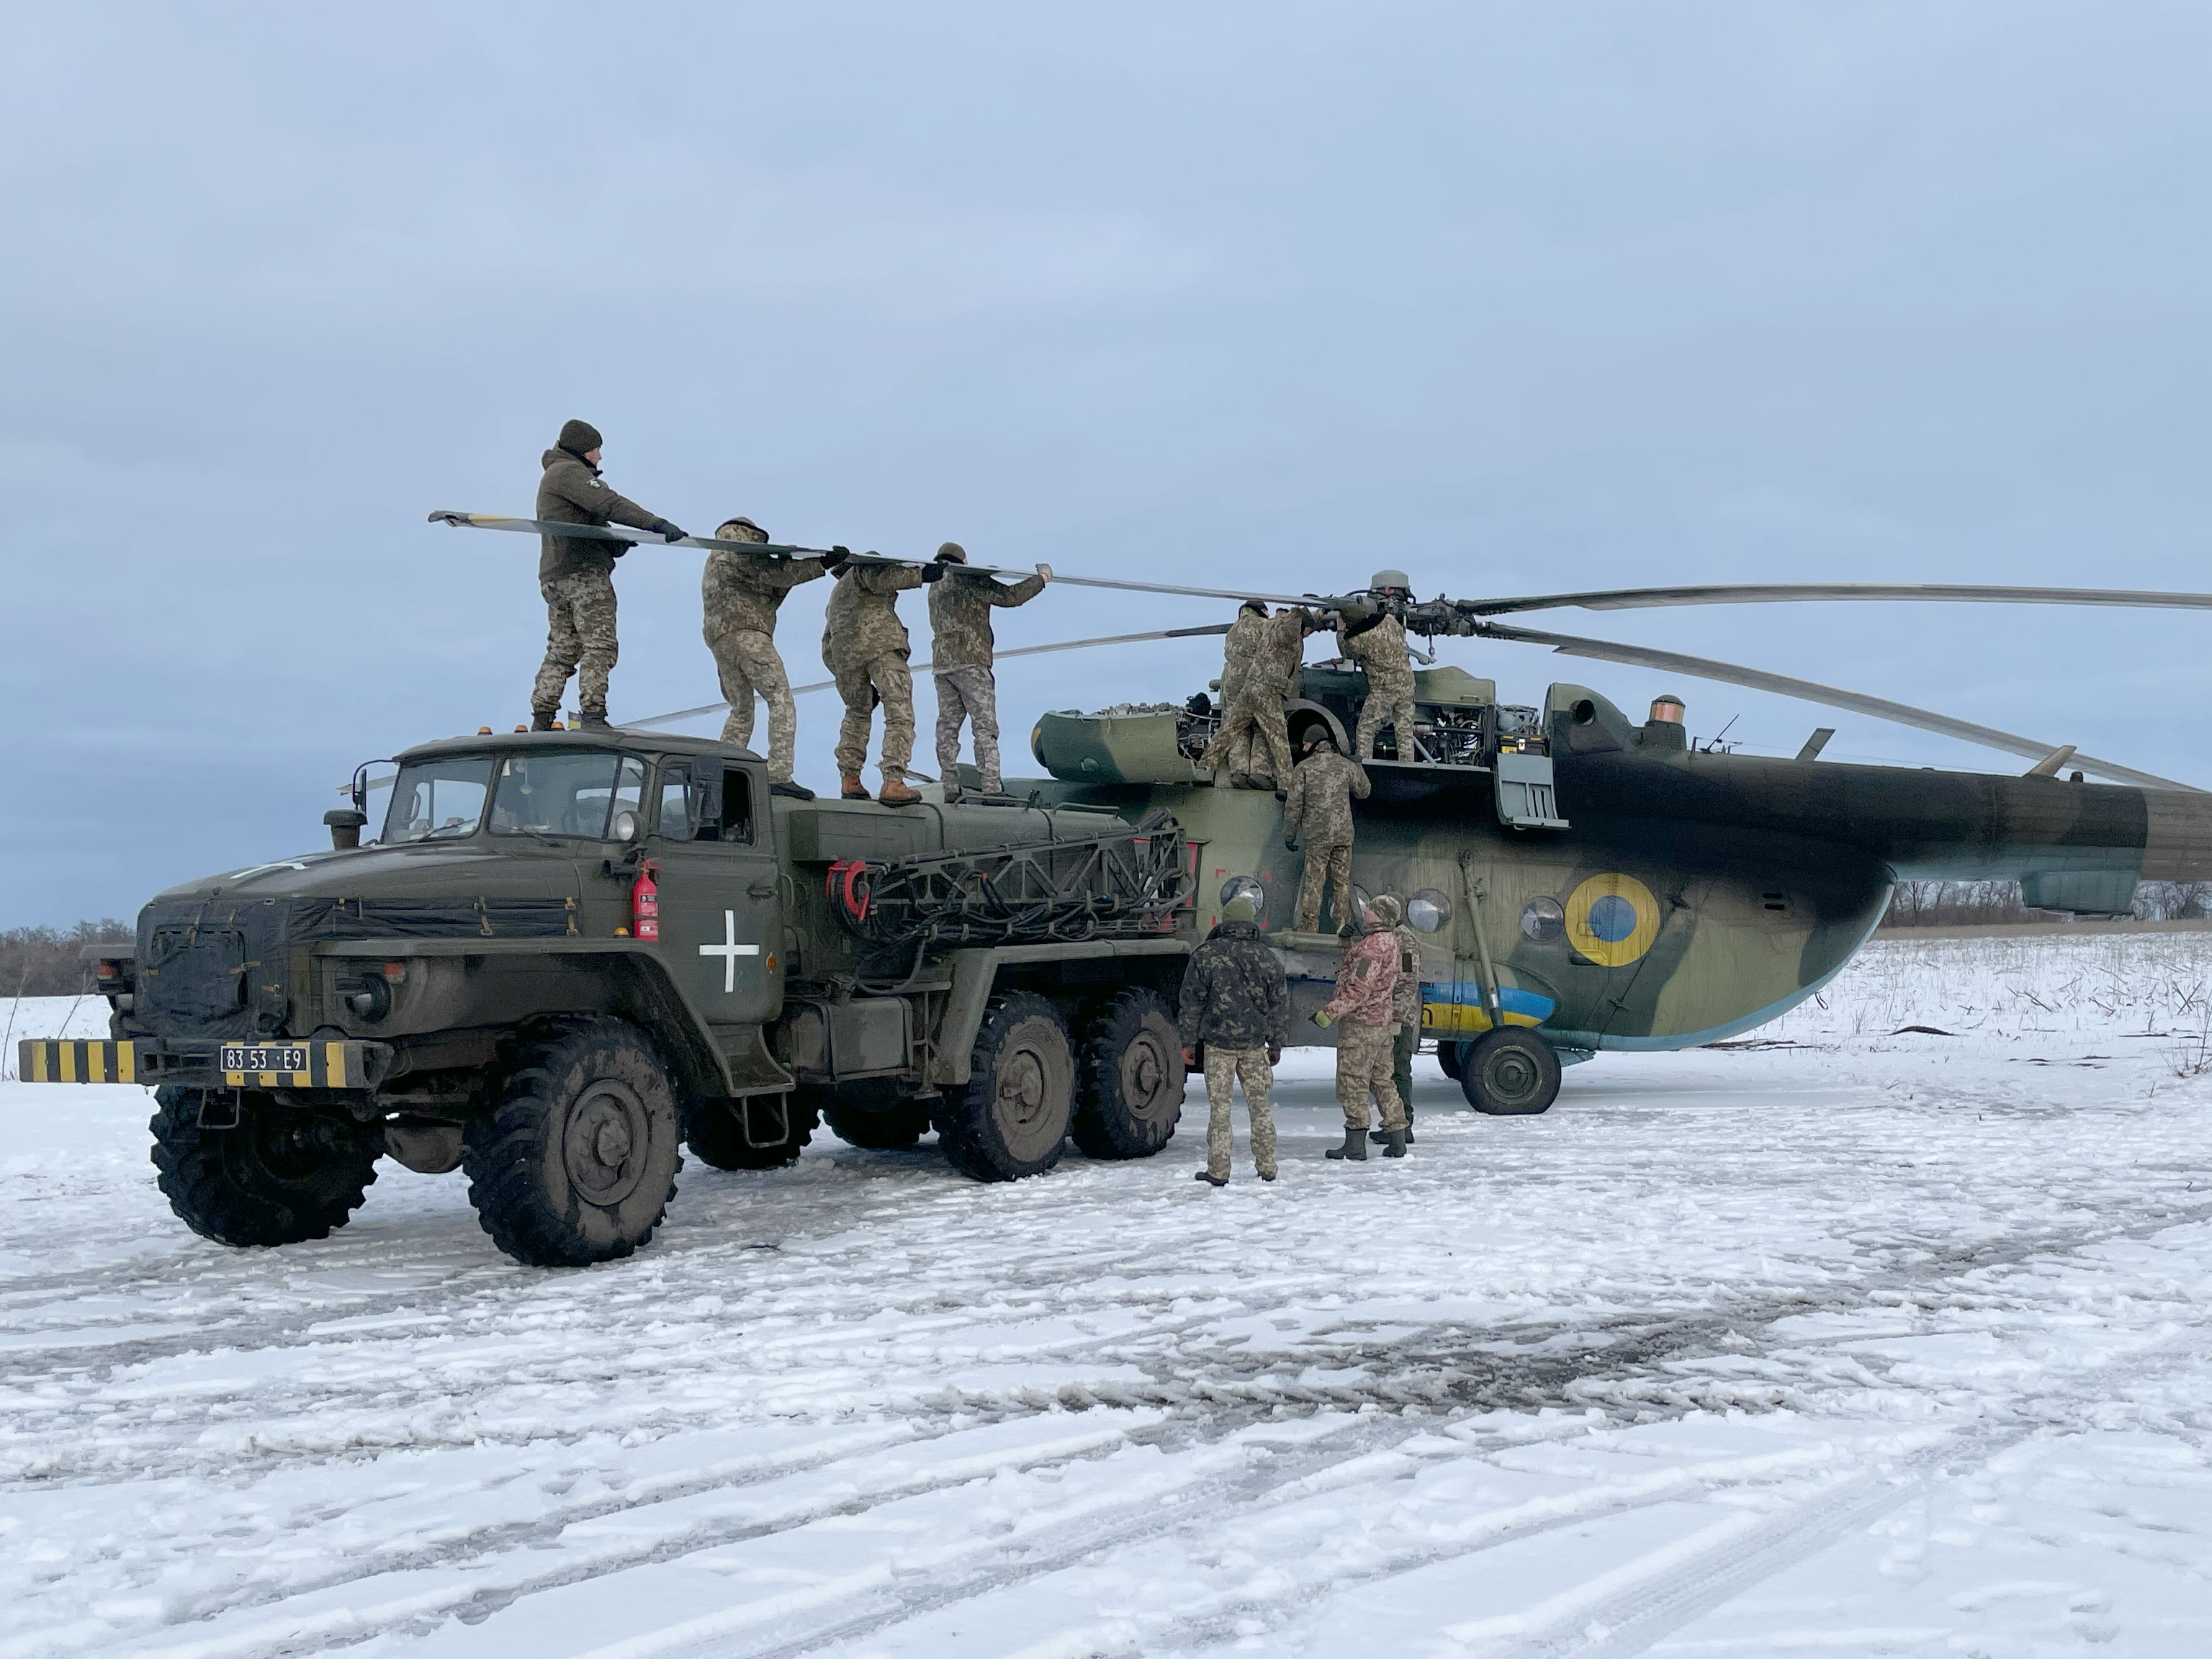 After striking a tree, engineers work to replace the blades on the Soviet-built Mi-8 helicopter. 